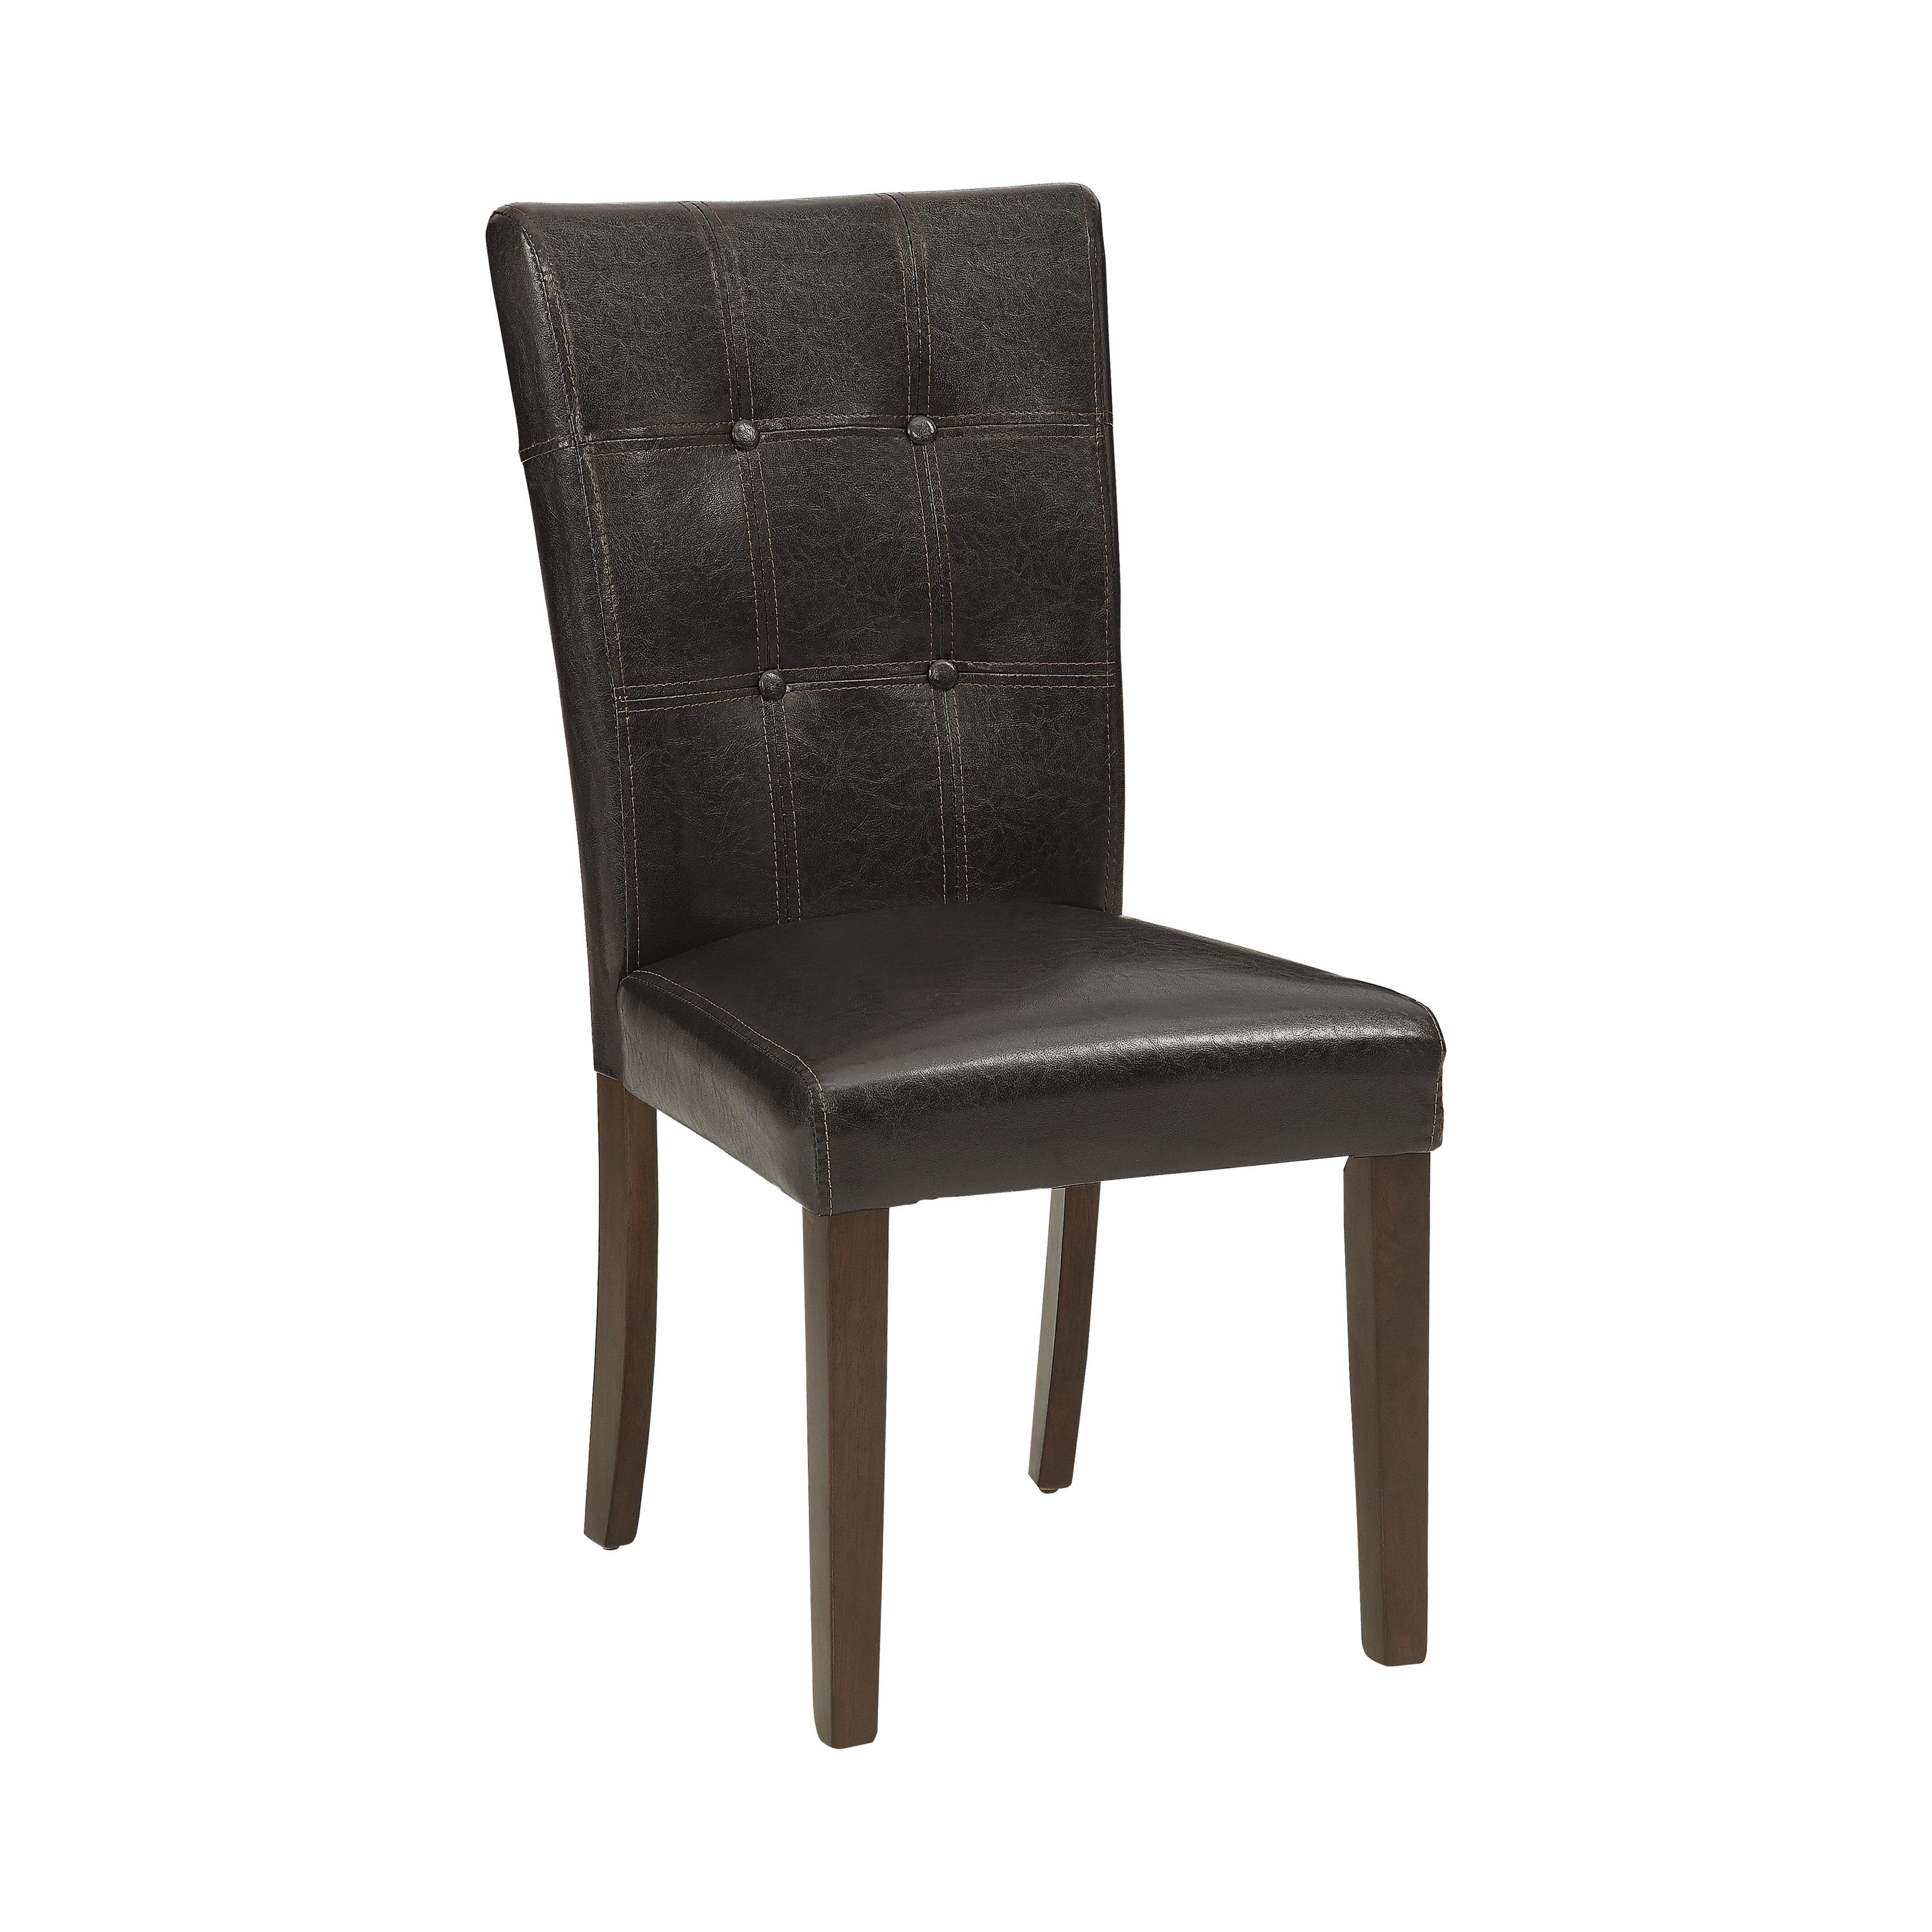 Transitional Side Chair Set 2456S Decatur 2456S in Espresso Faux Leather